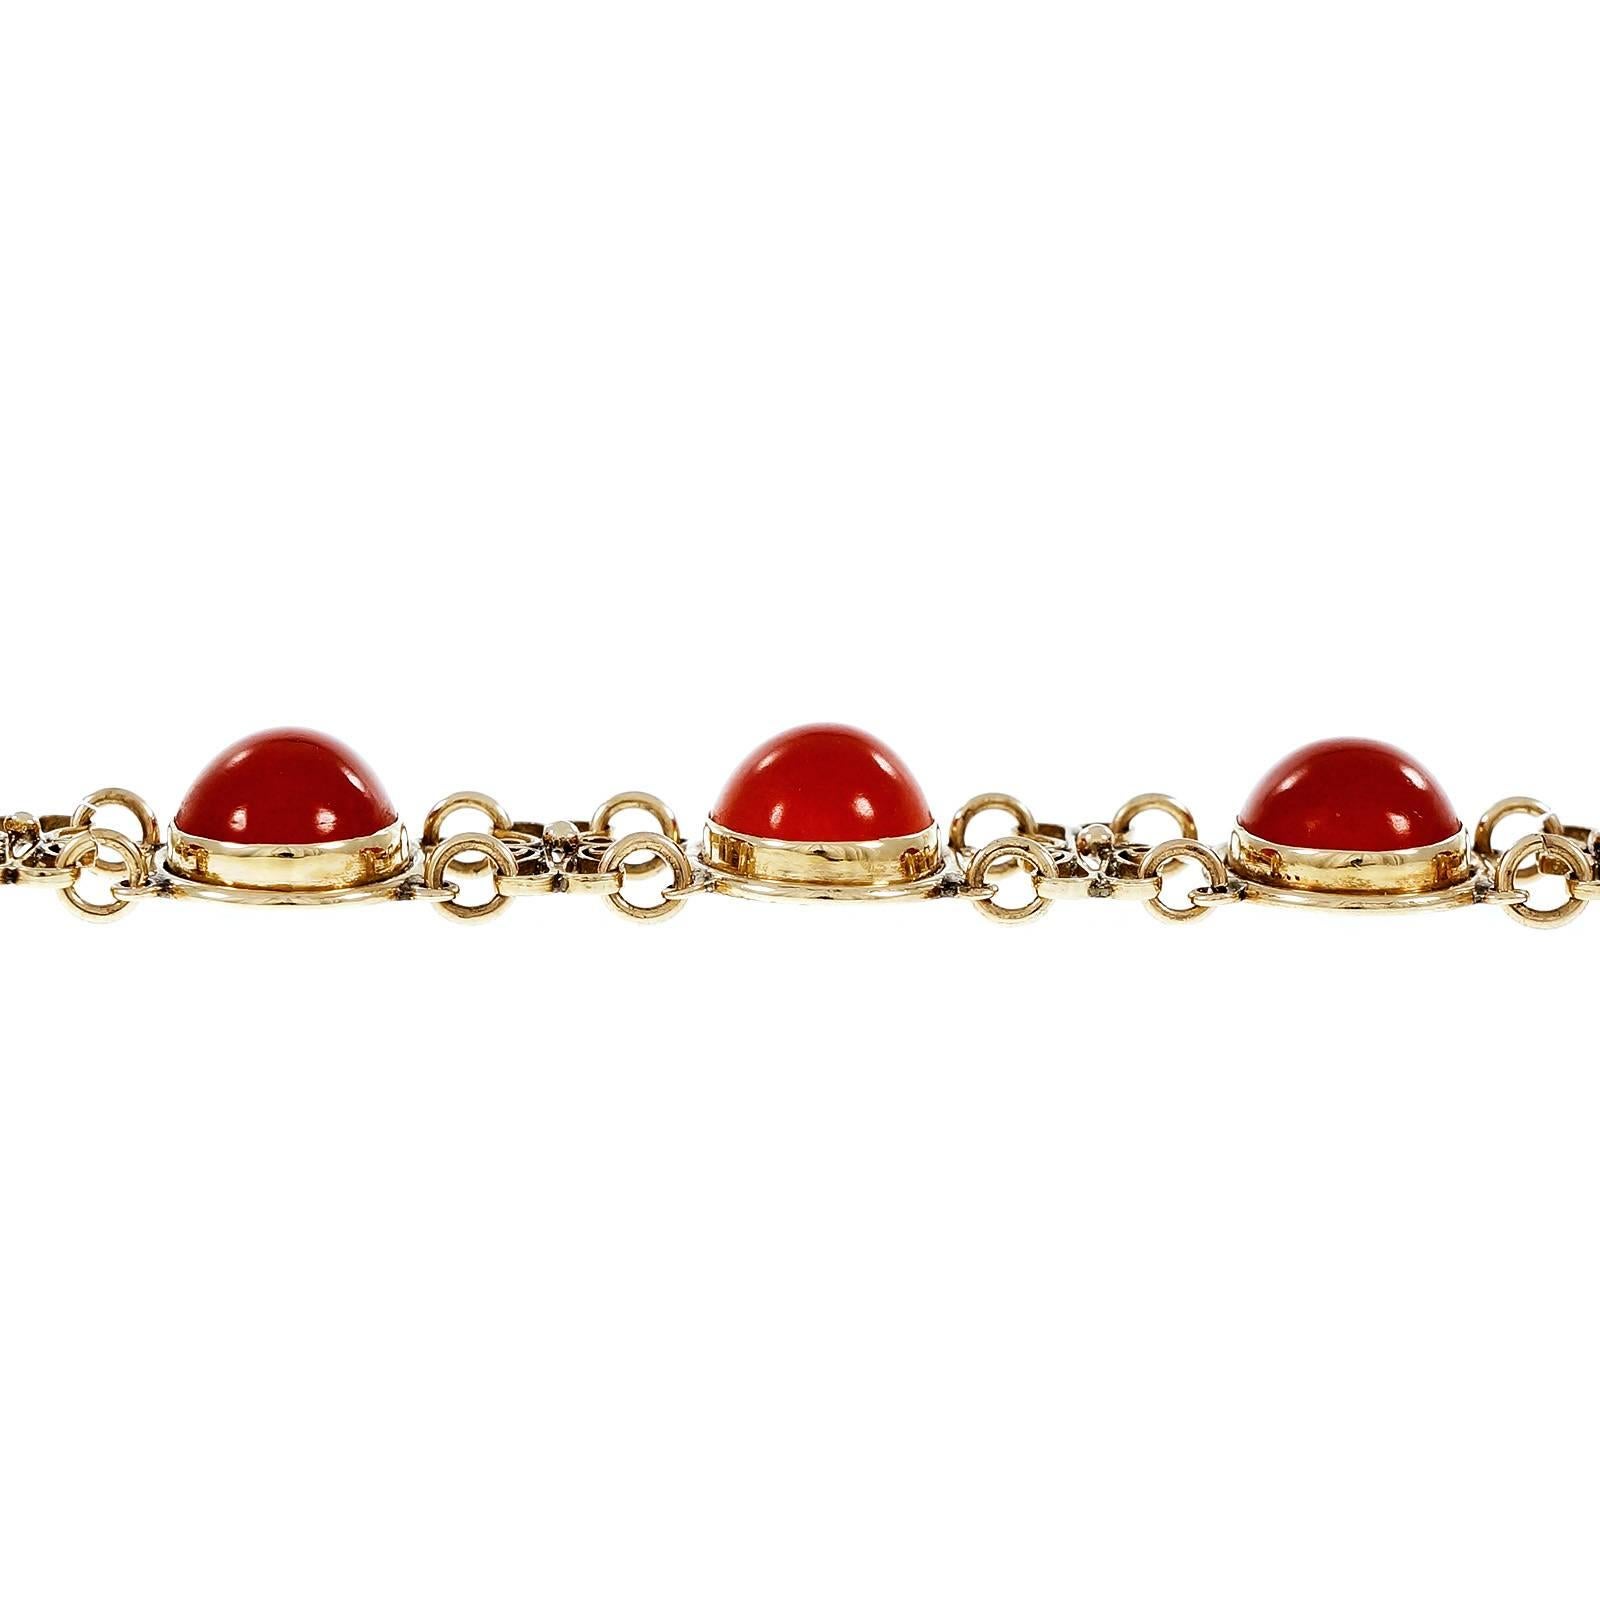 Oval Orange Red Natural Coral Gold Bracelet. Circa 1940.

8 oval cabochon orange red Coral, 11.73 x 8.44 x 4.45mm, GIA certificate #2171882584
14k yellow gold
16.6 grams
Tested: 14k
Stamped:  585
Chain: 7.5 inches – Width: 14.49mm – Depth: